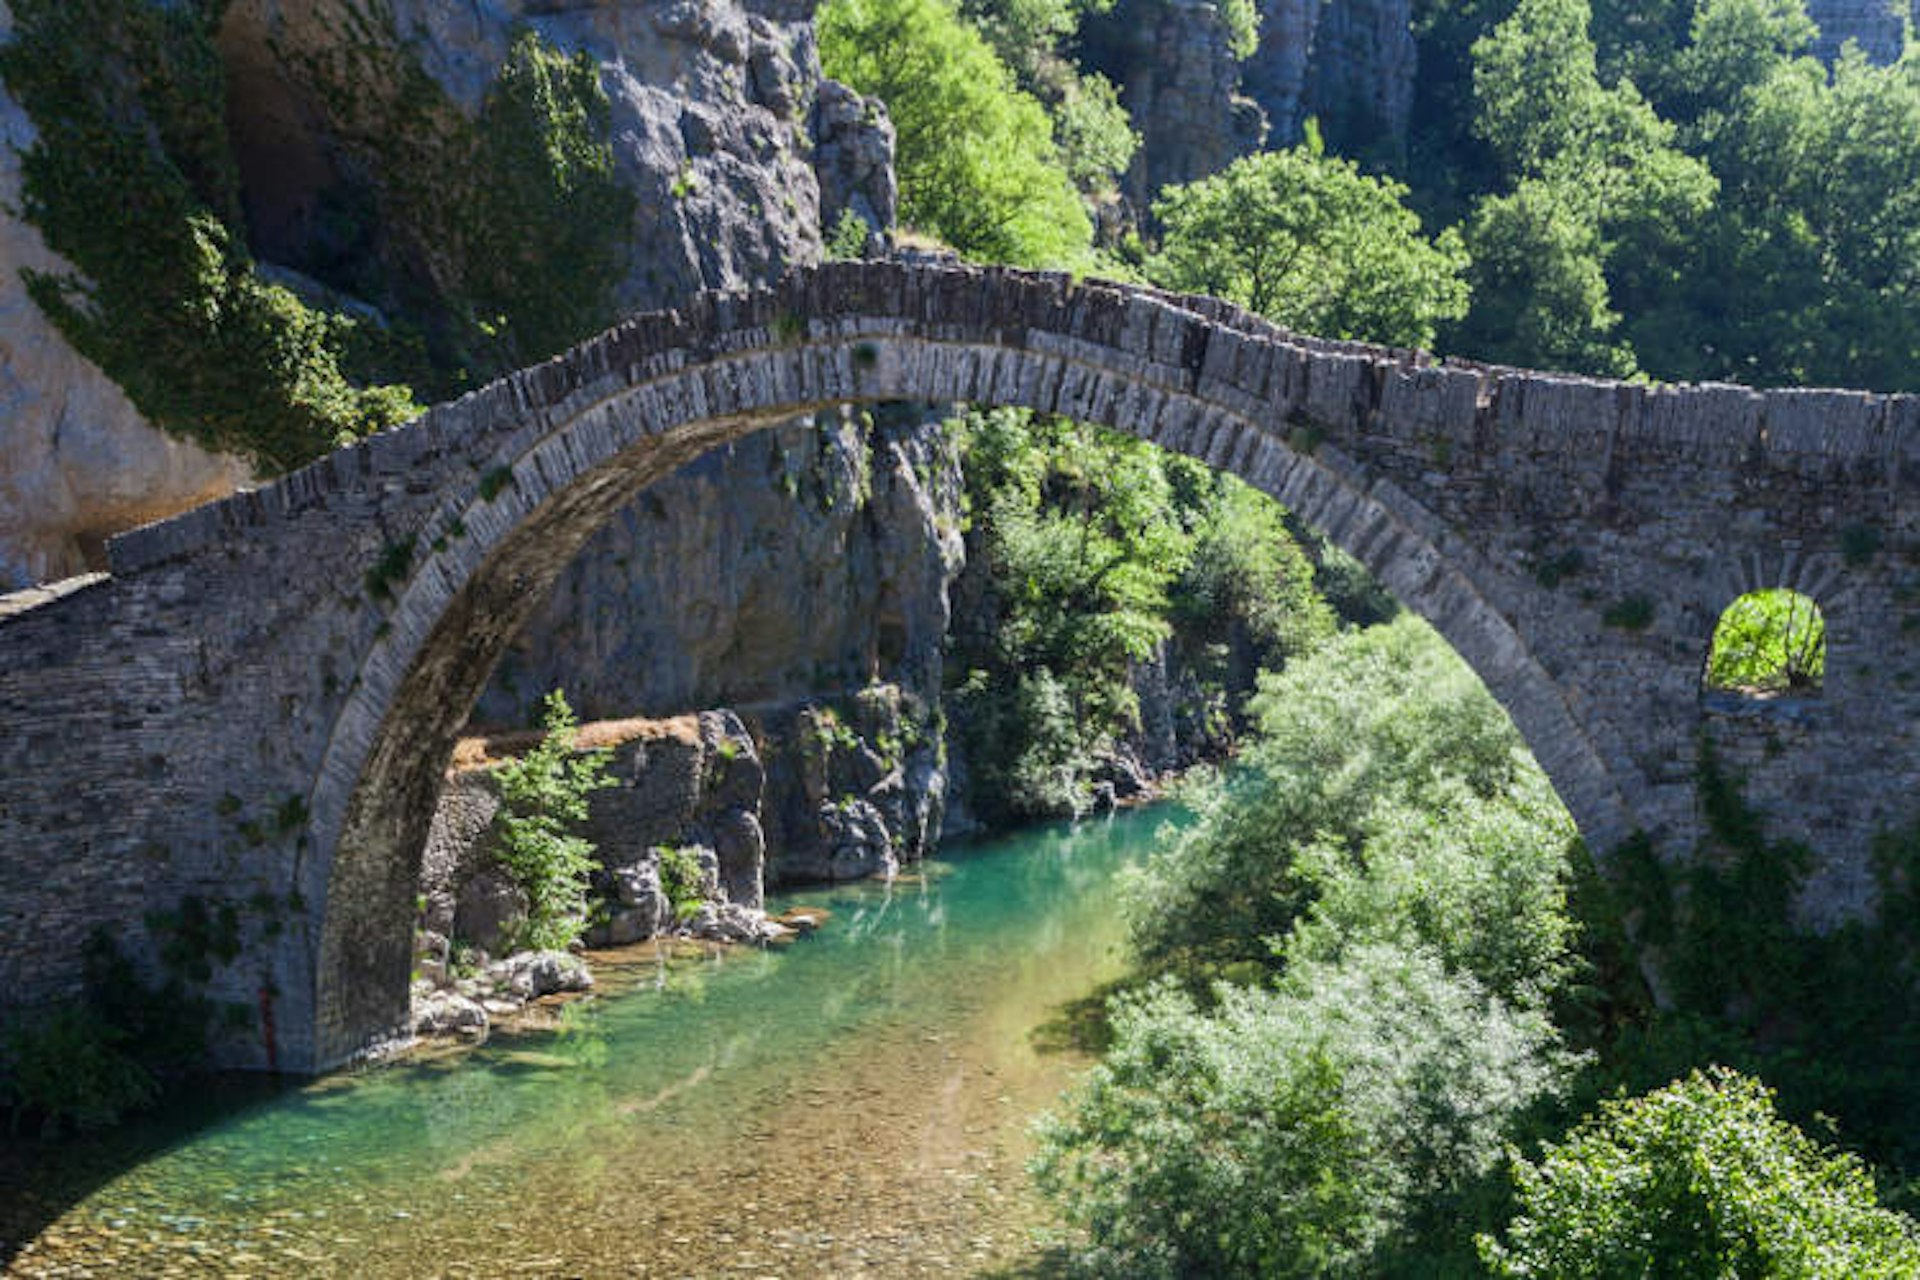 Ottoman arched bridge over Voidomatis River, Vikos Gorge. Image by Danita Delimont / Getty Images